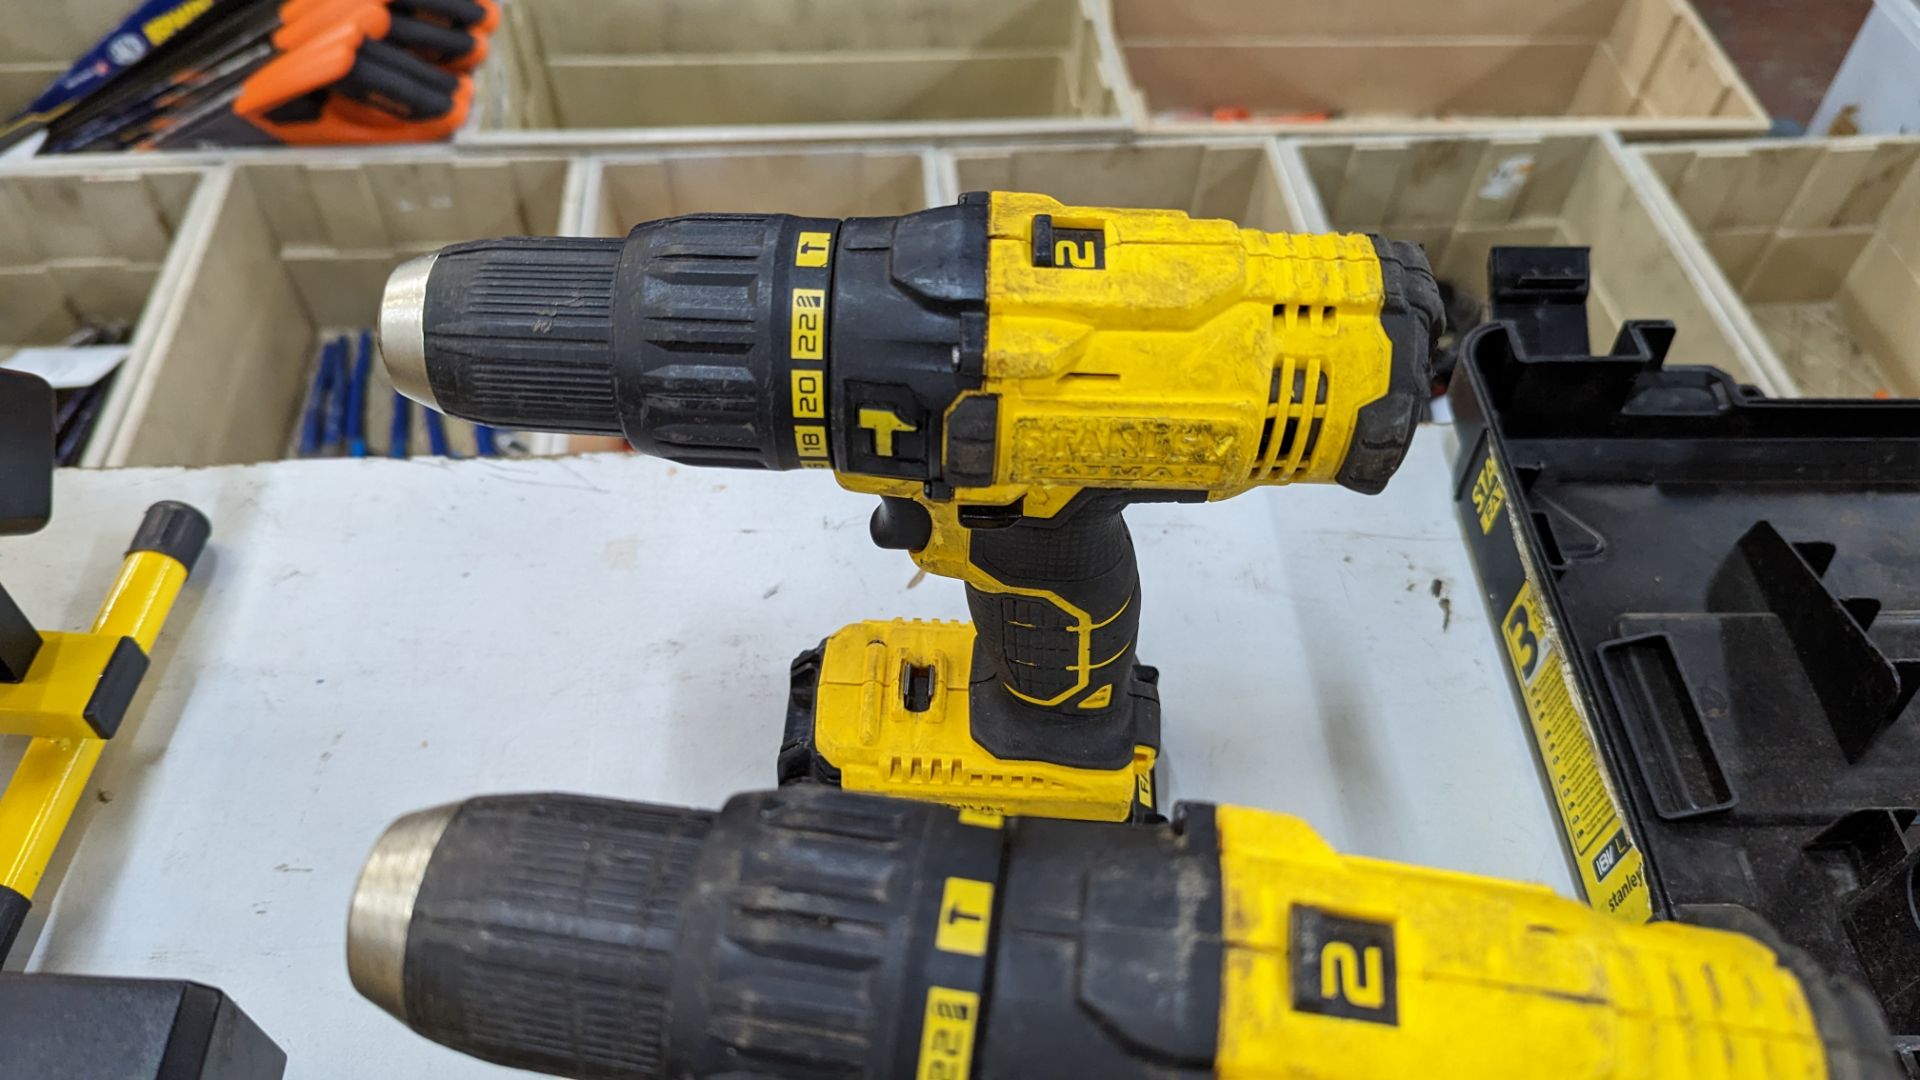 3 off 18 volt lithium cordless drills. Each drill includes an 18 volt lithium battery. This lot do - Image 4 of 7